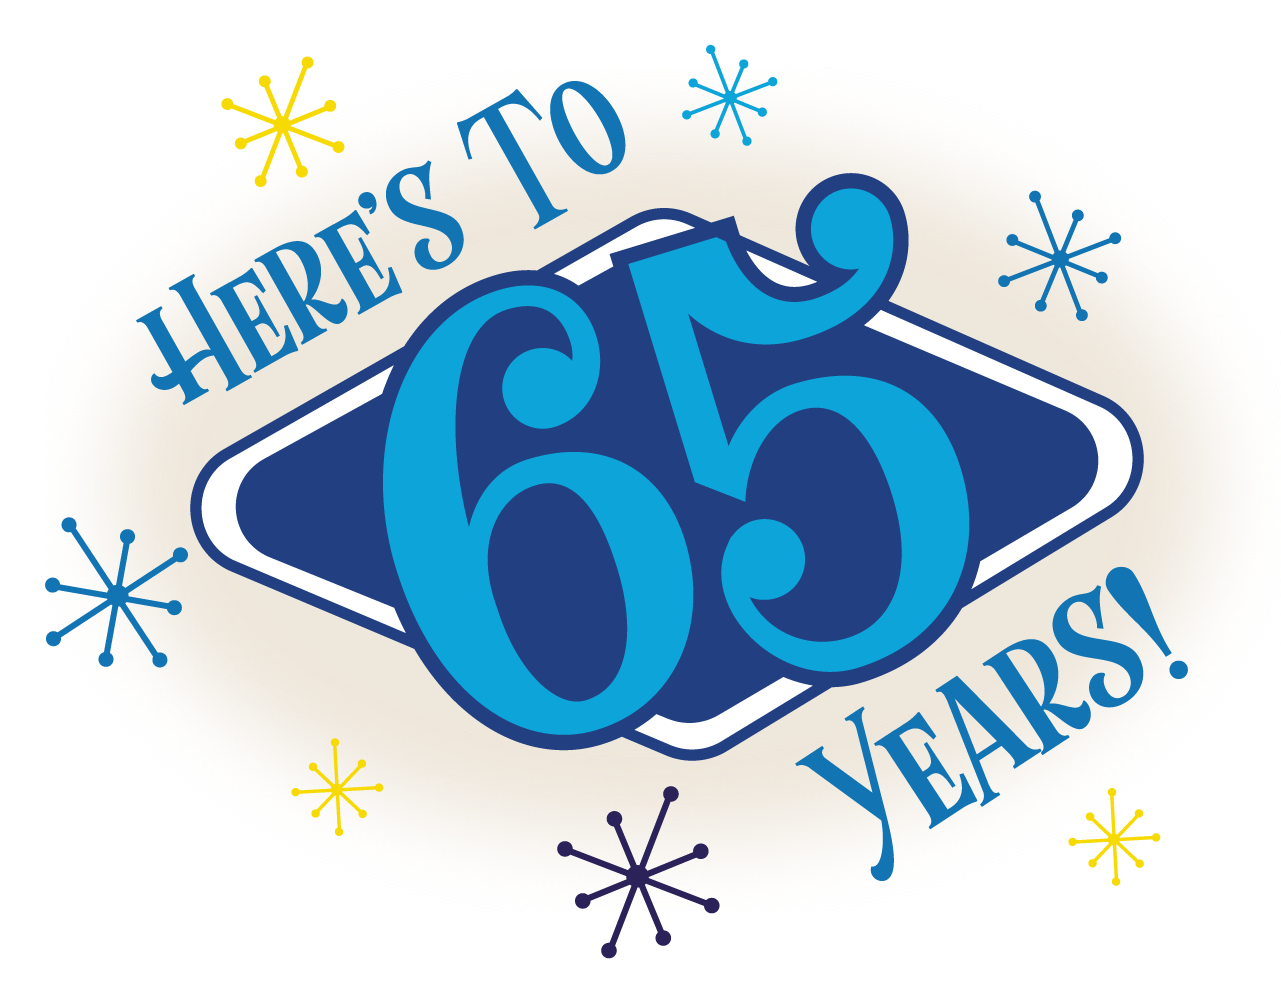 Heres' to 65 years!